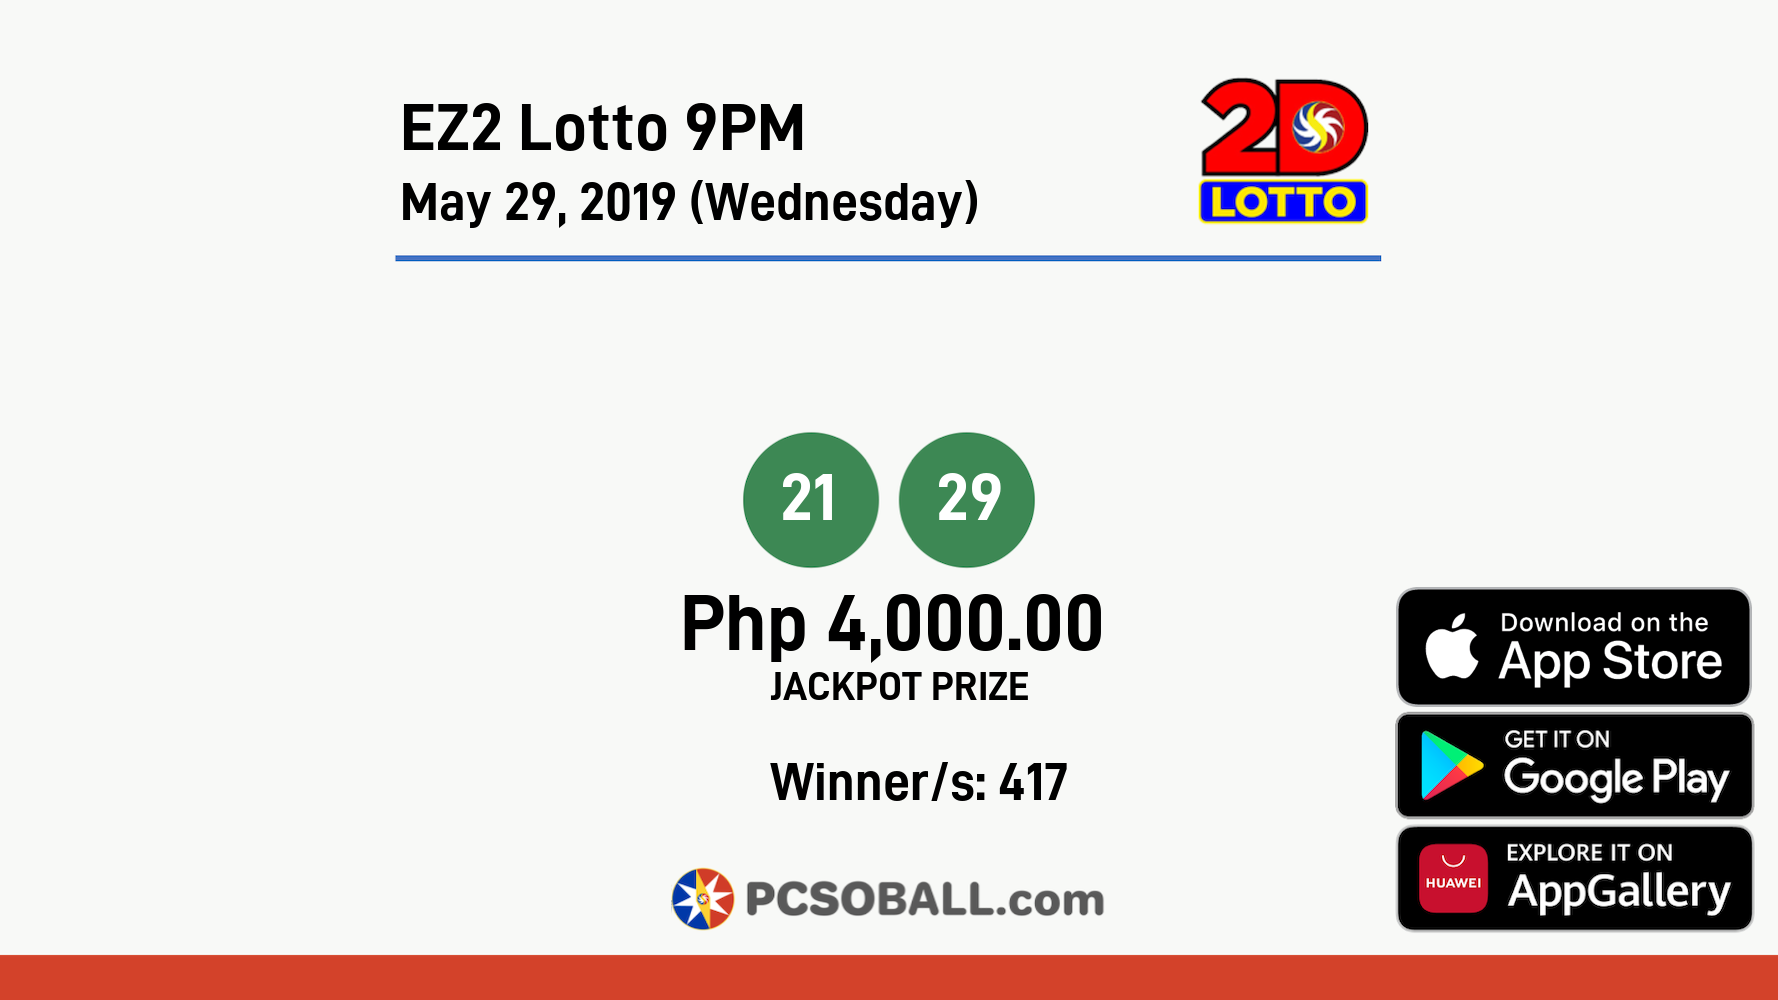 EZ2 Lotto 9PM May 29, 2019 (Wednesday) Result